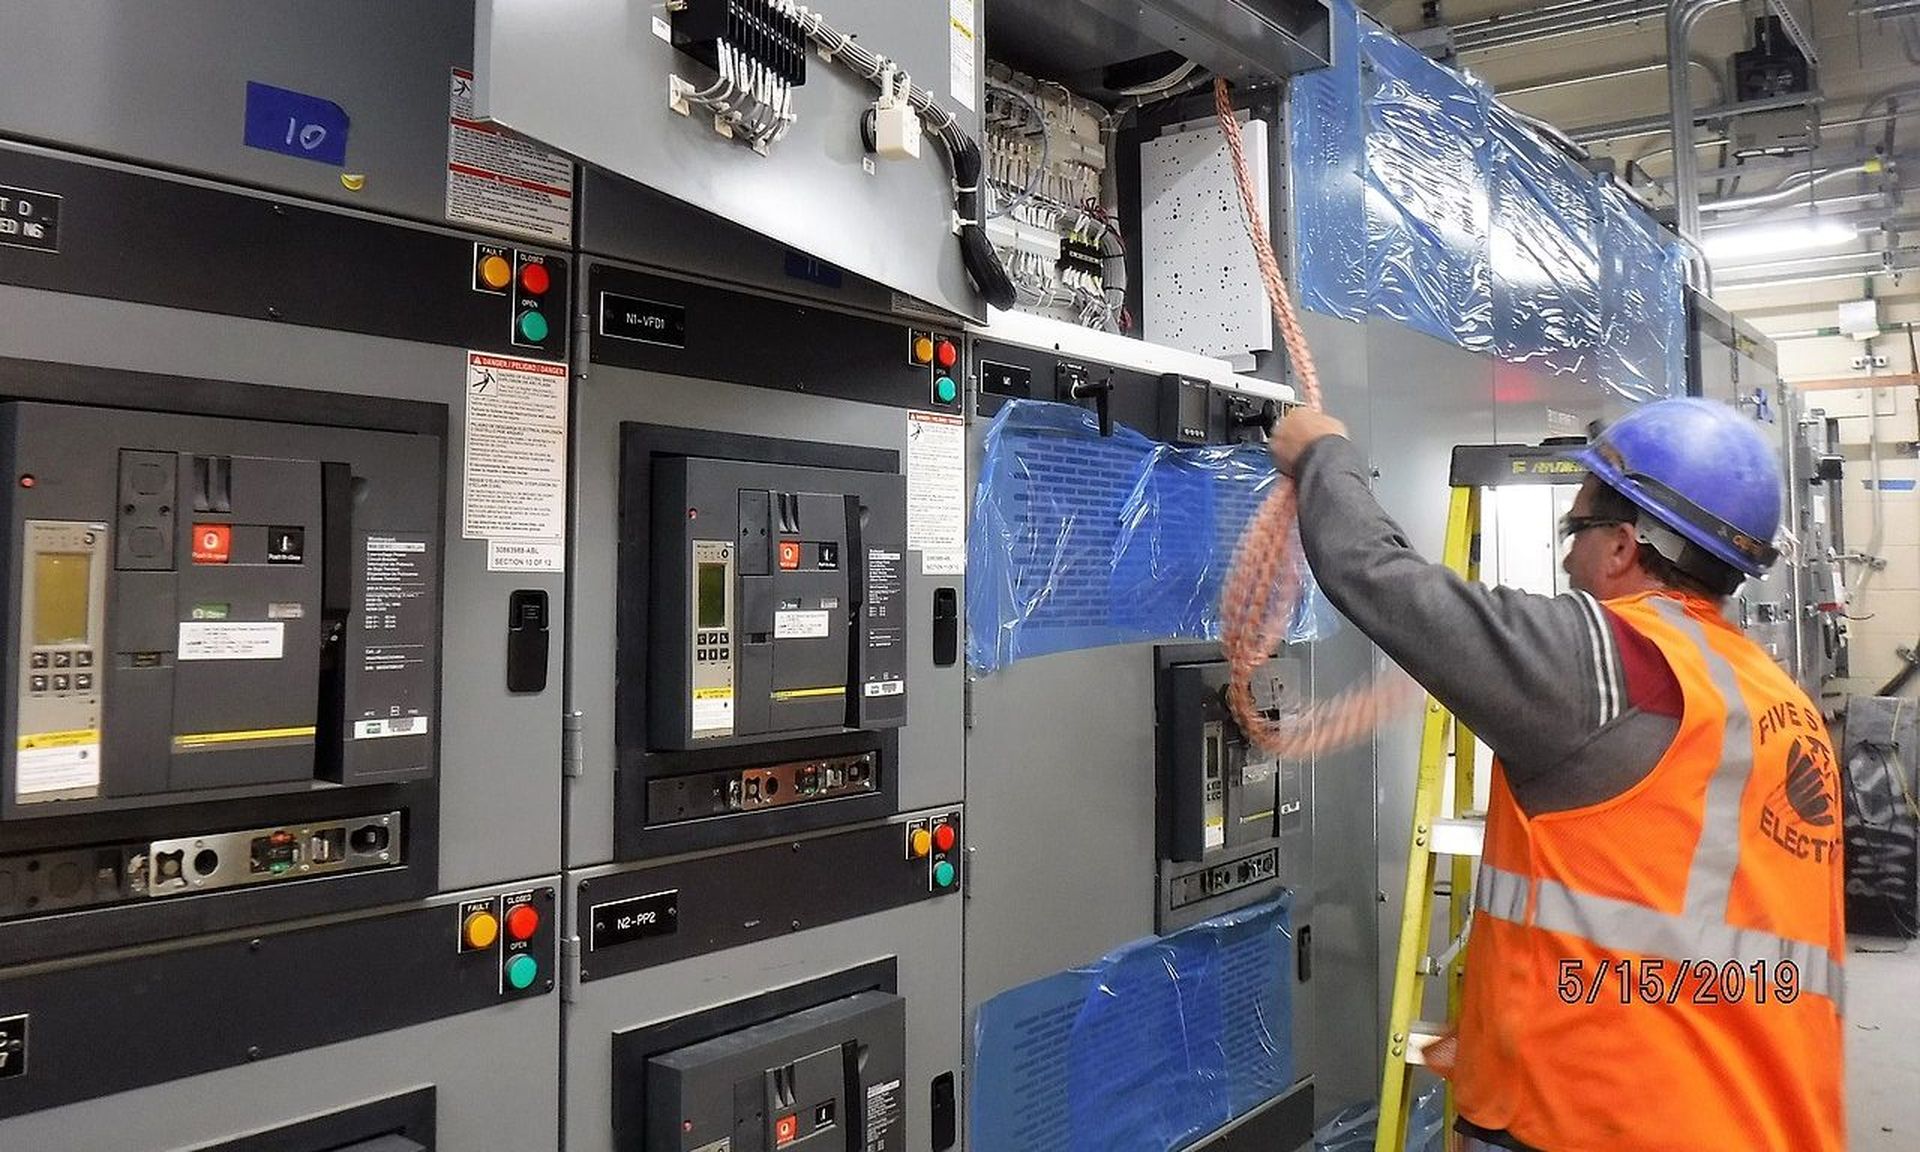 A technician removes existing control wires in a SCADA cabinet in preparation for relocation. (MTA Capital Construction Mega Projects/CC BY 2.0/https://creativecommons.org/licenses/by/2.0/deed.en)